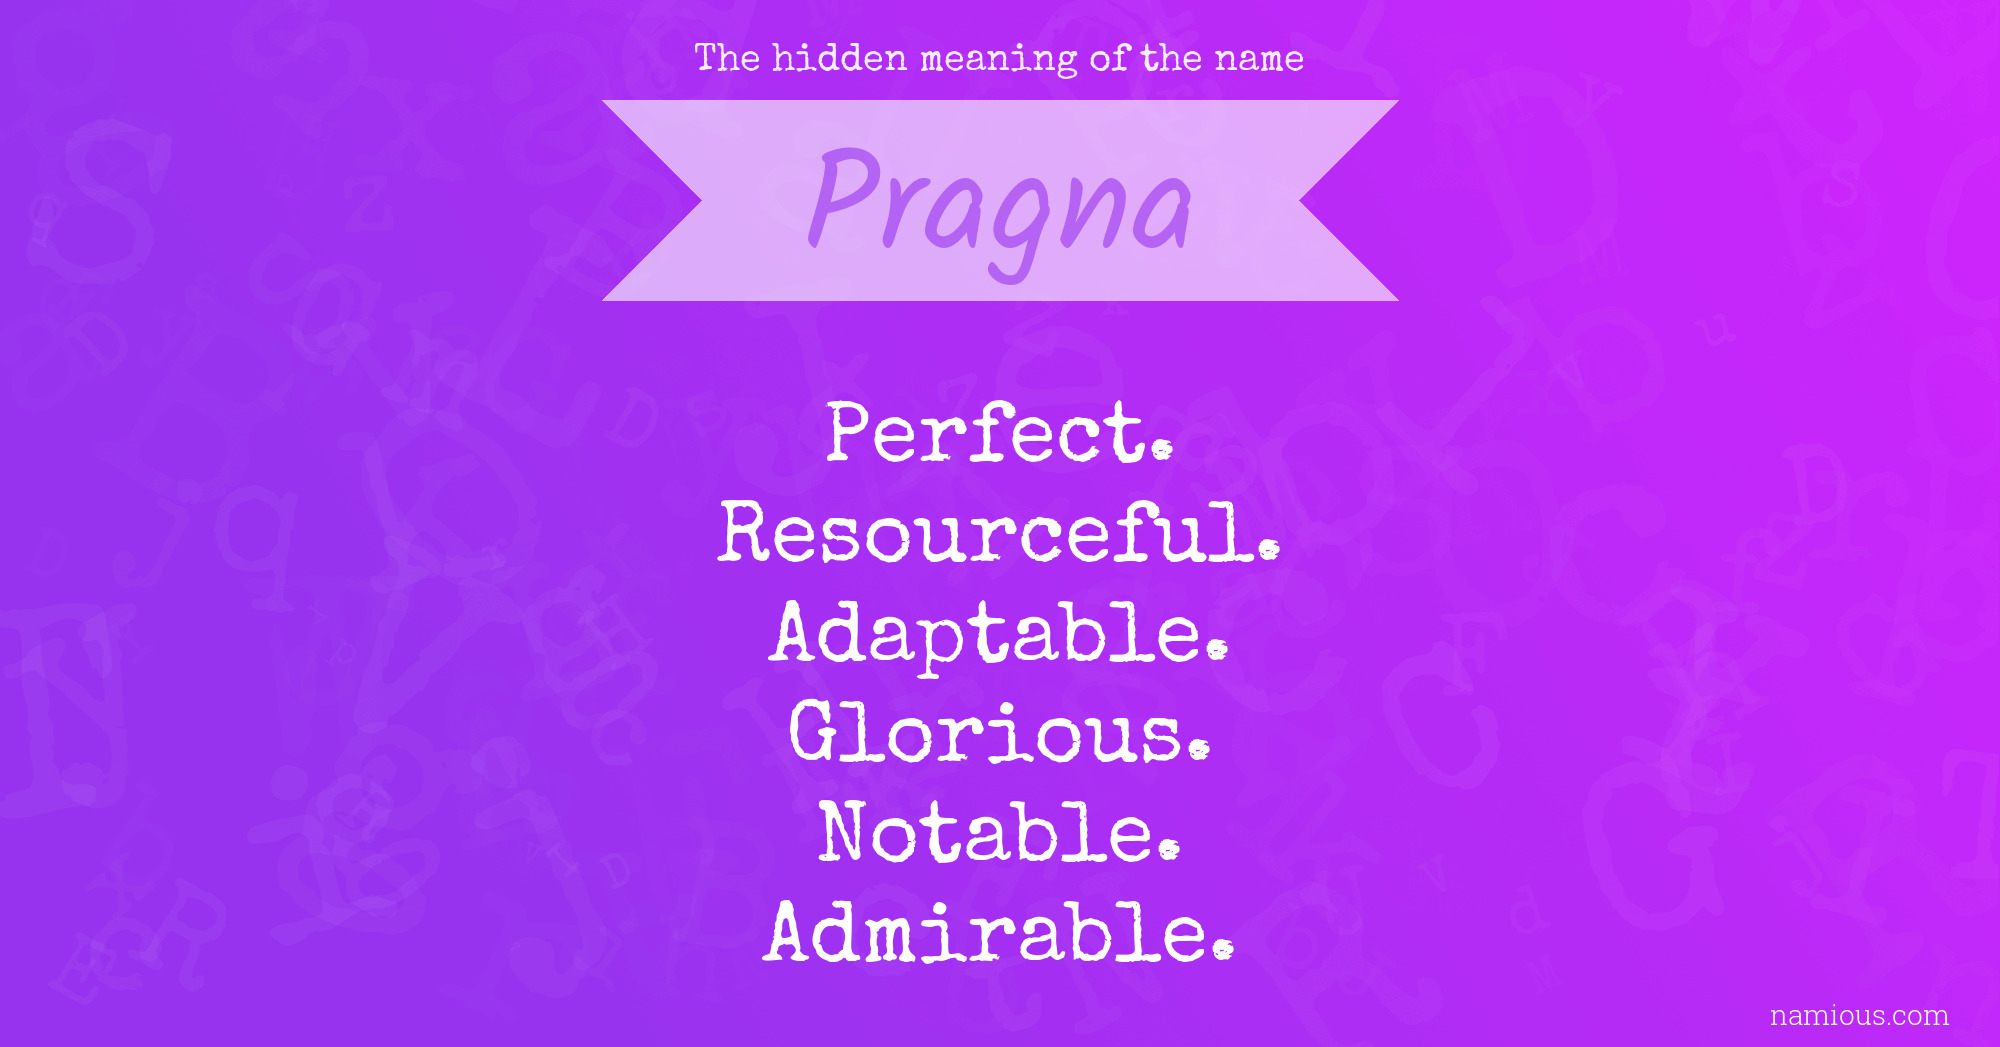 The hidden meaning of the name Pragna | Namious